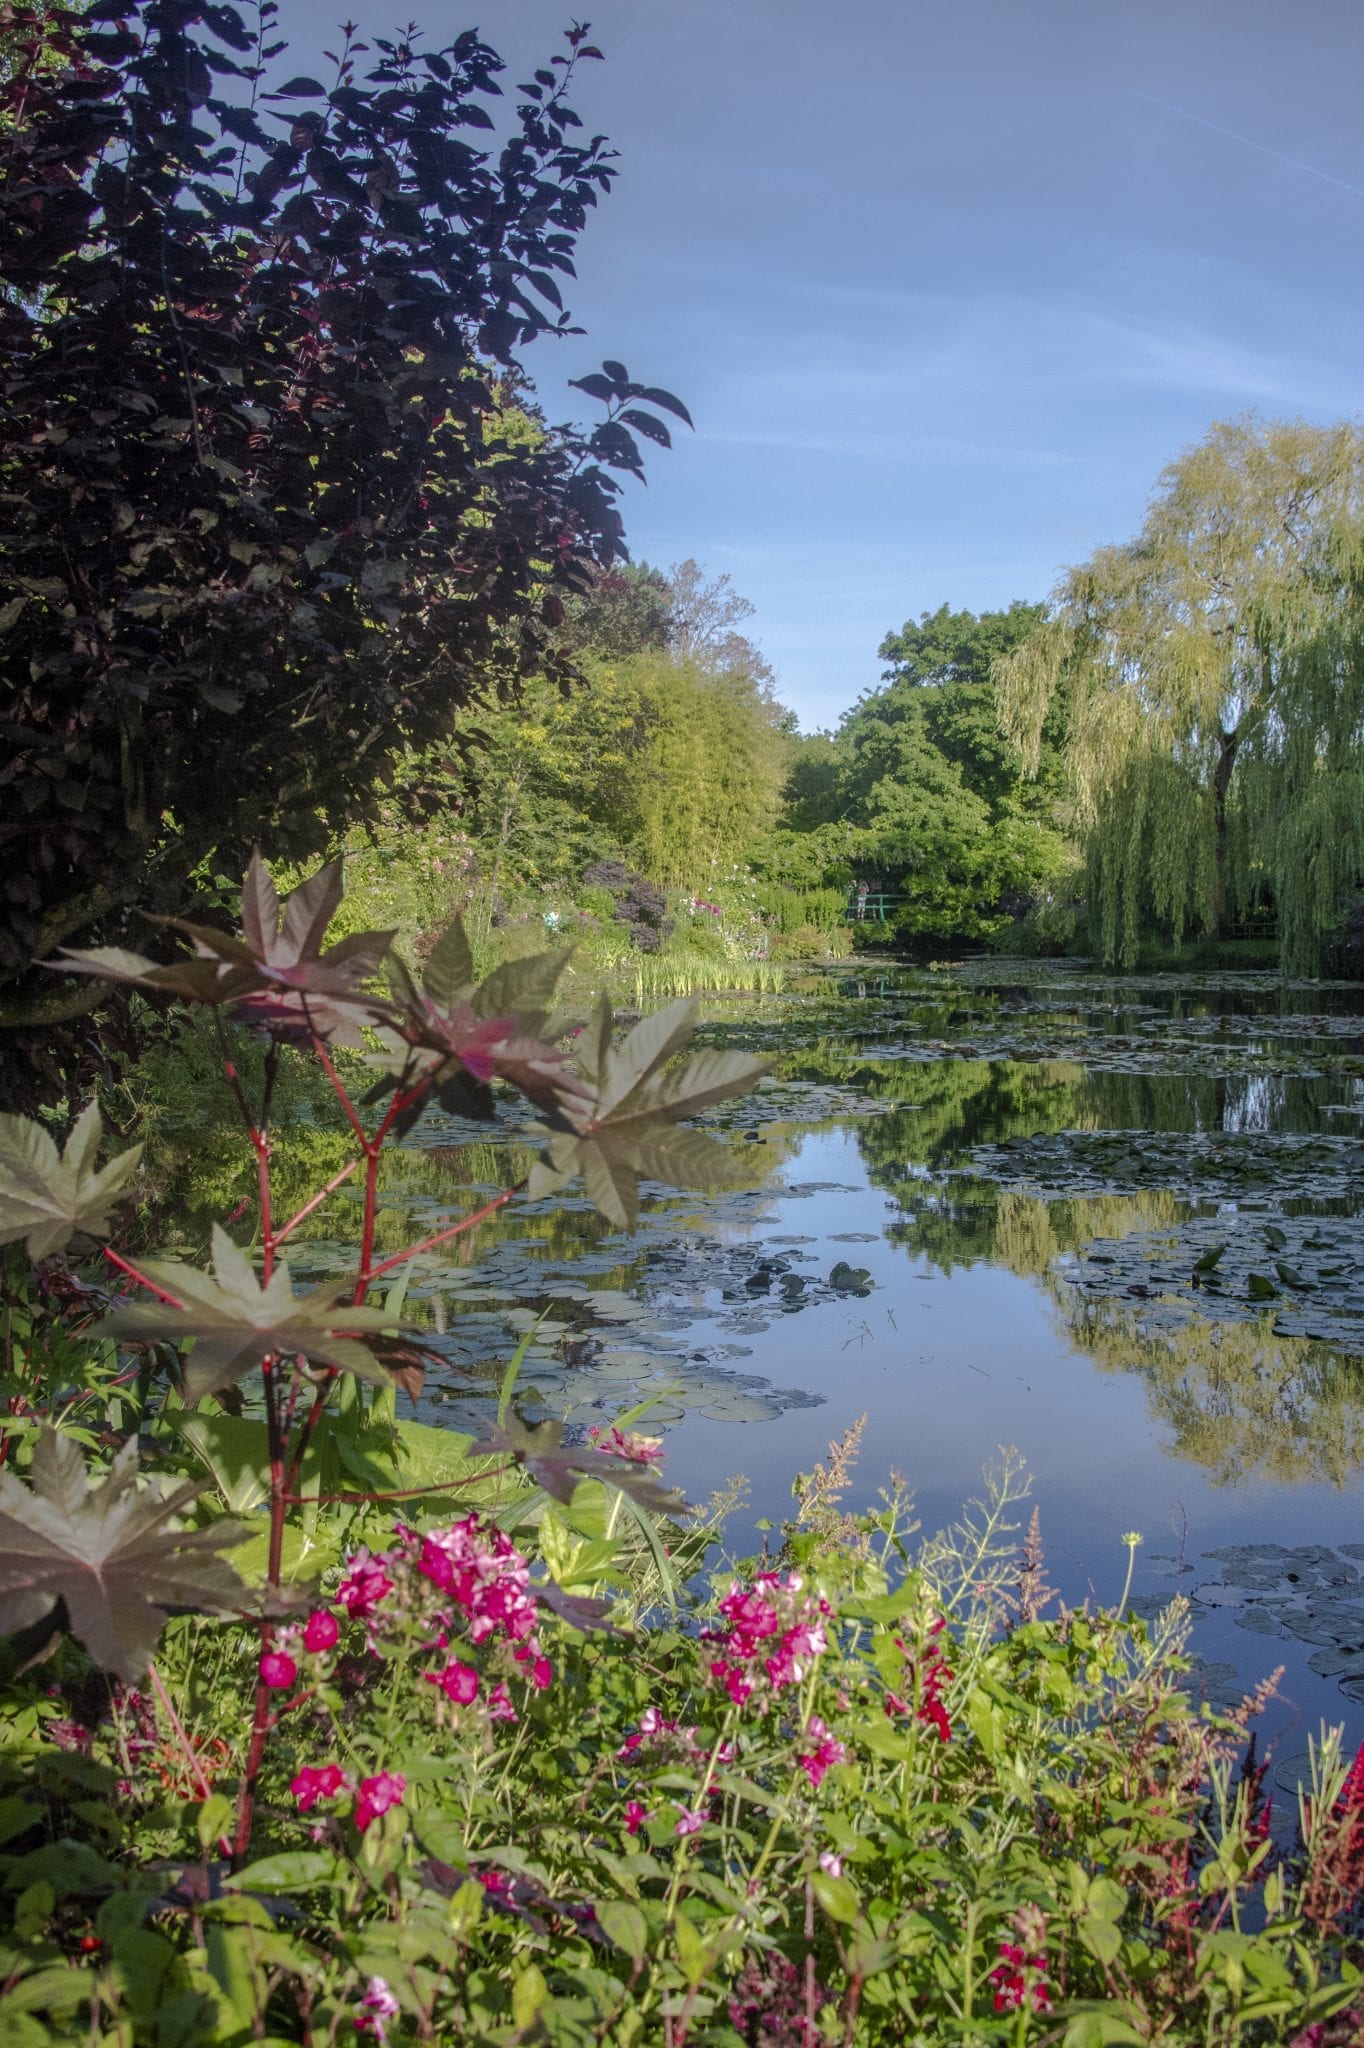 Photograph of Giverny where Monet lived